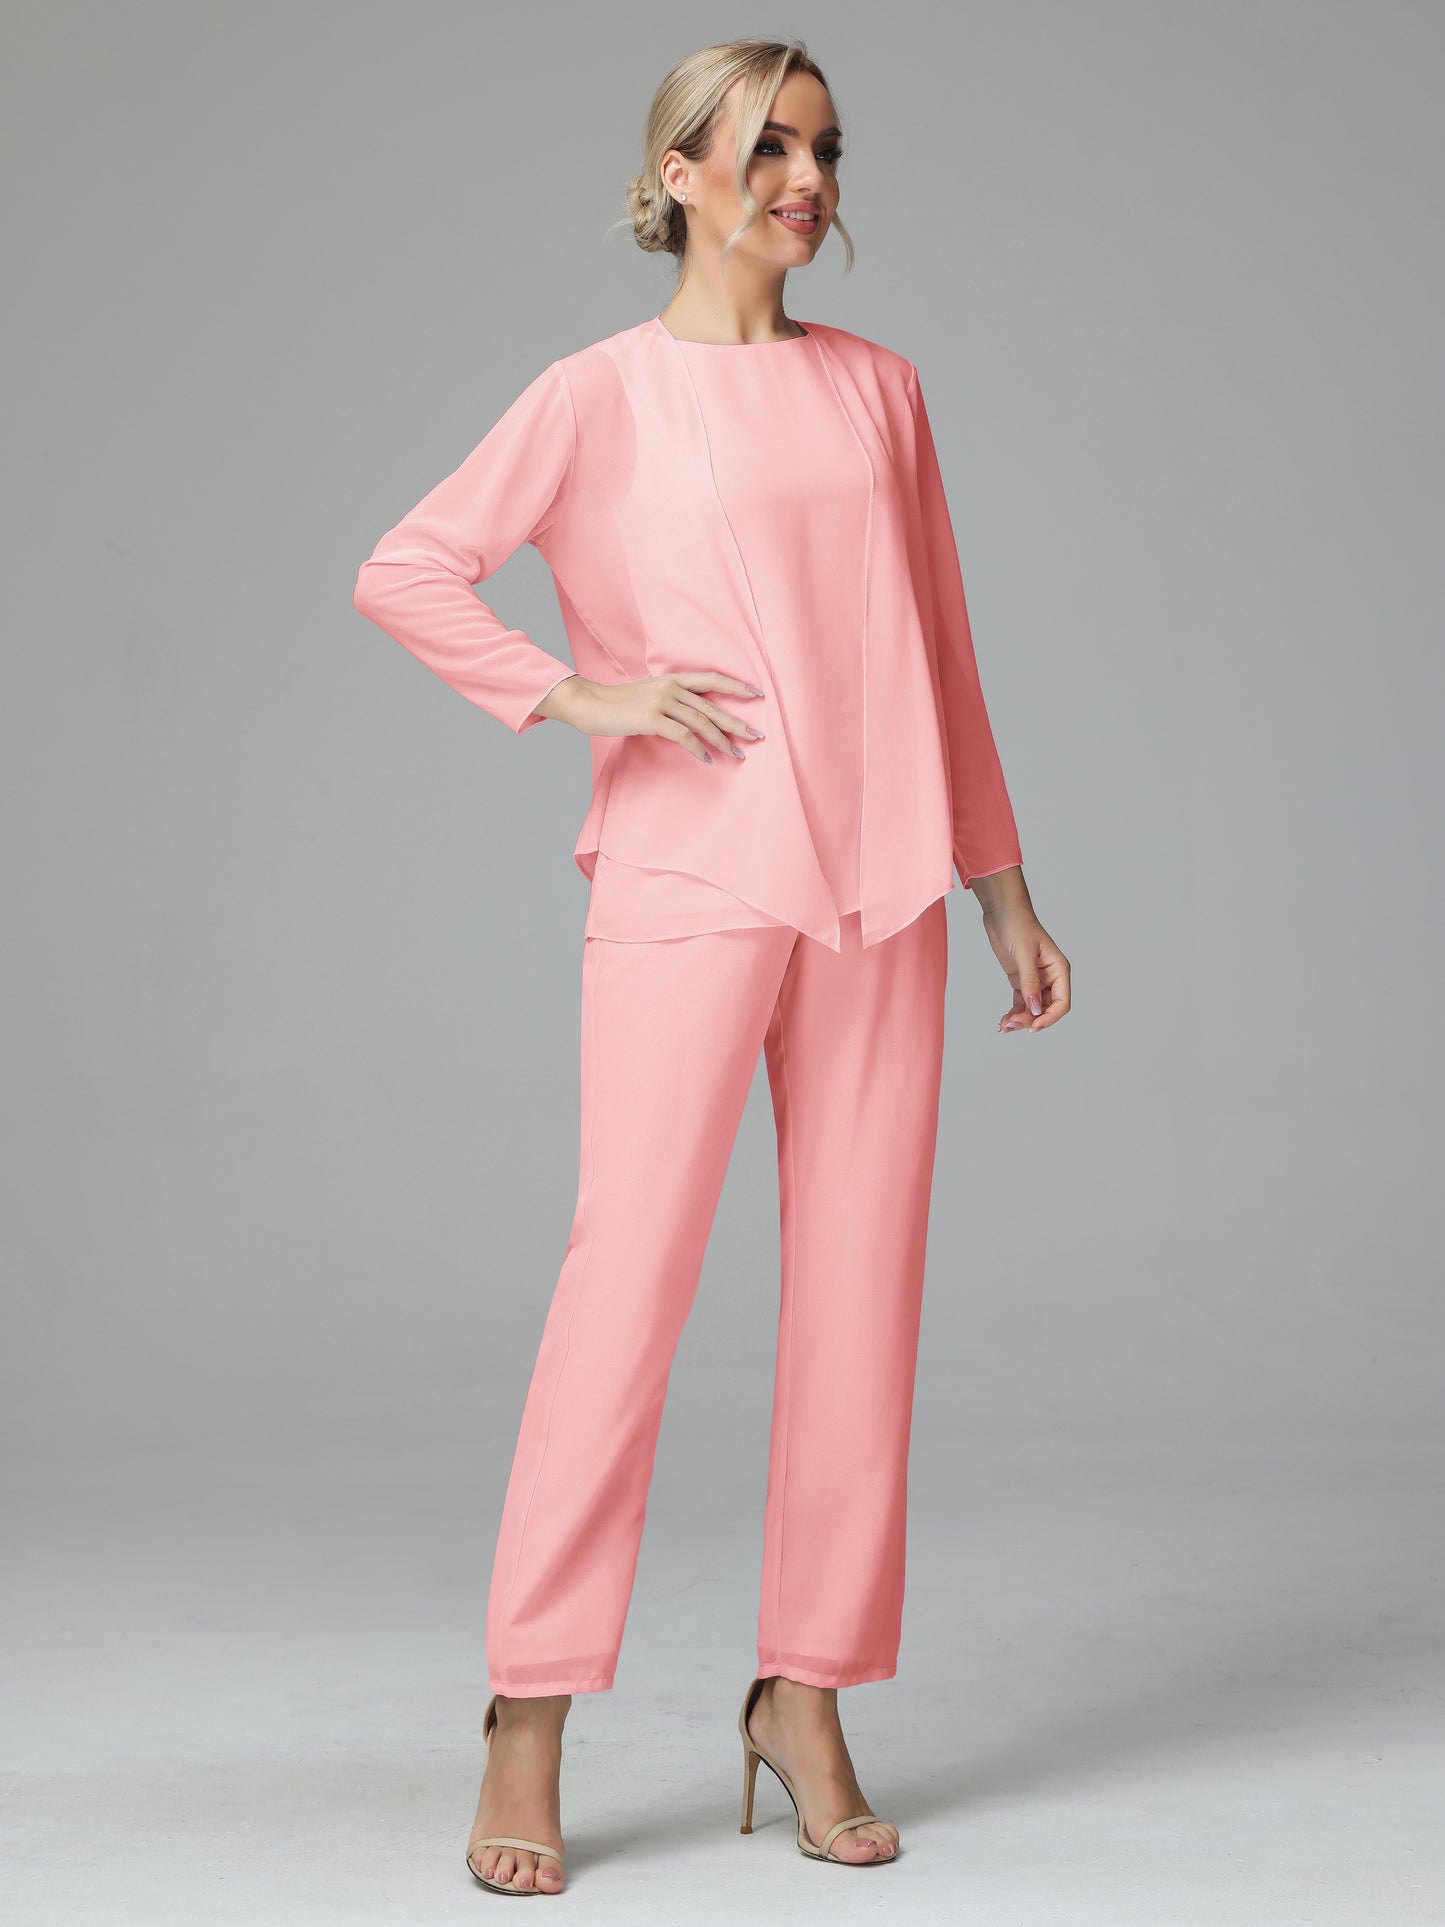 Chiffon Long Sleeves 3 Pieces Mother Of The Bride Dress Pants Suits